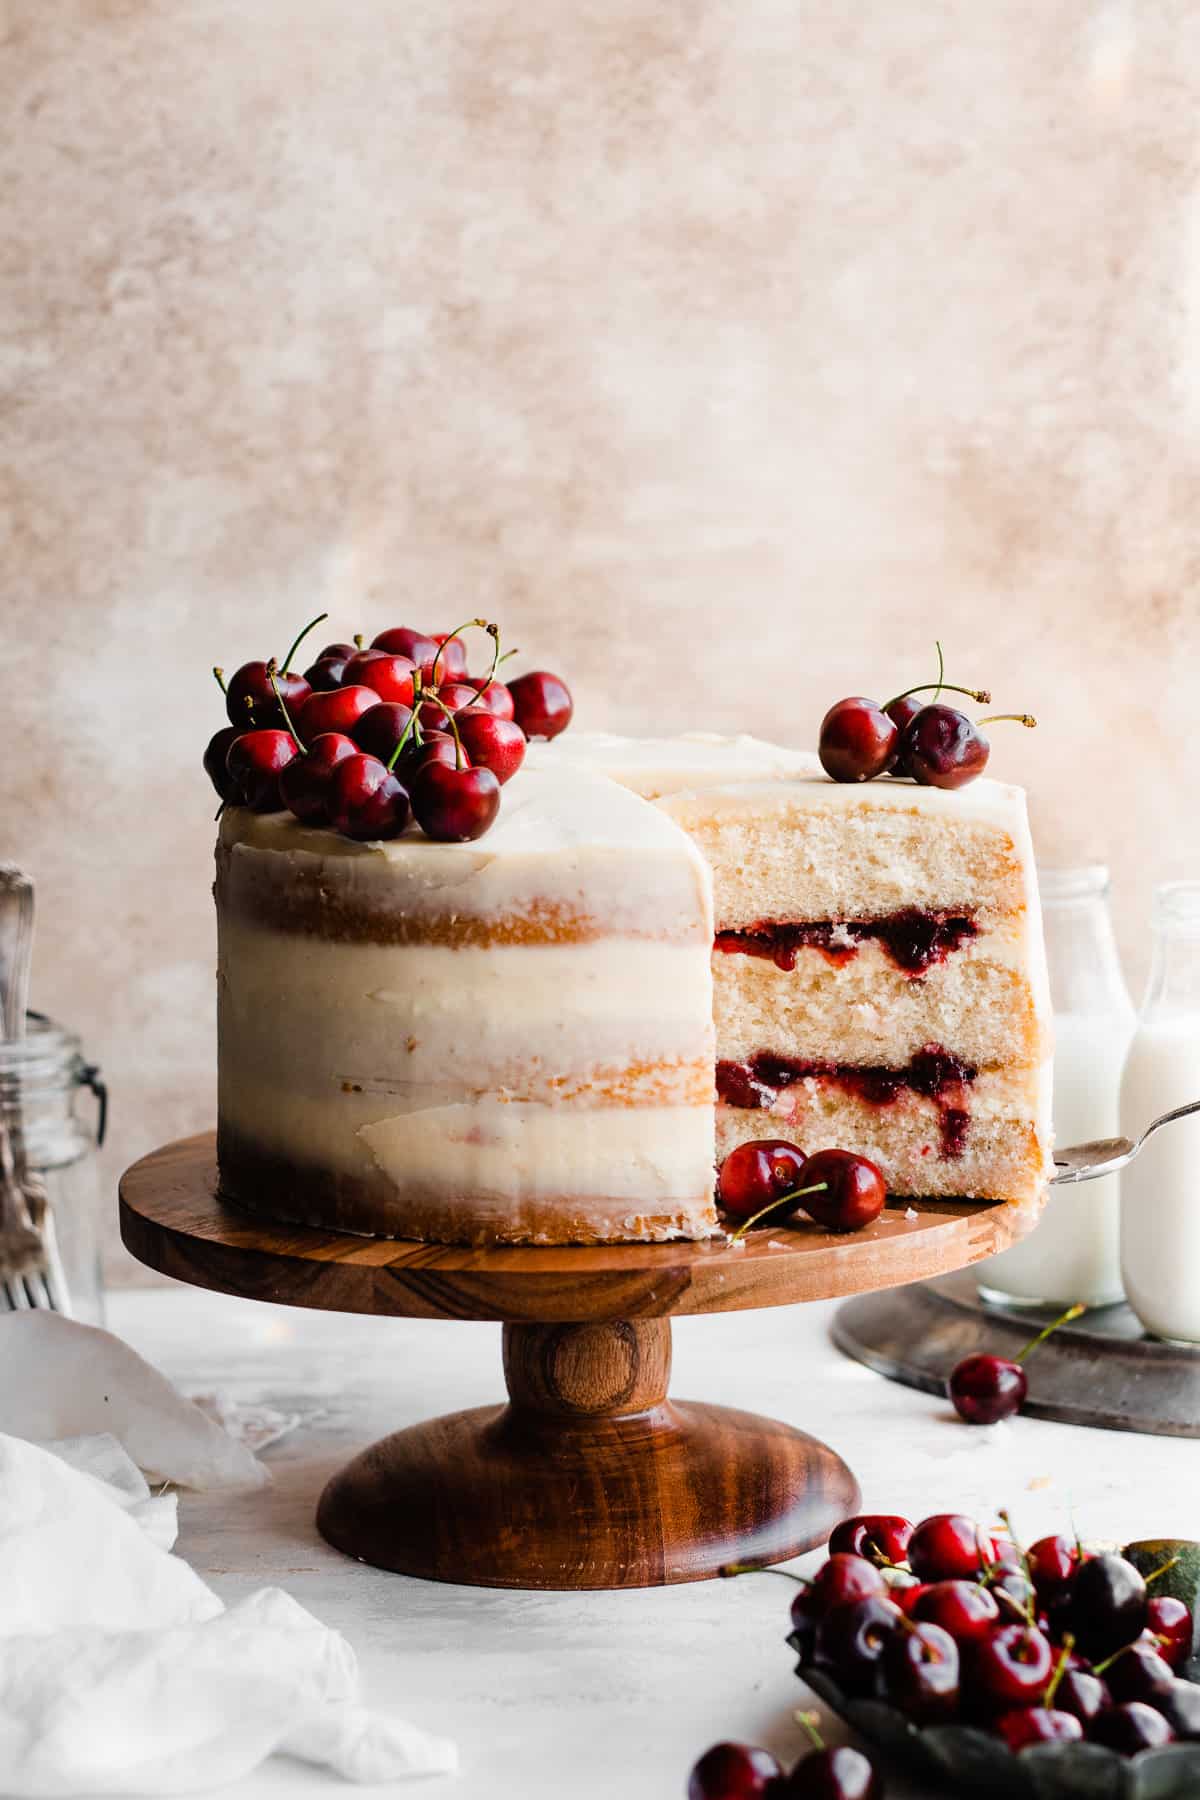 A three layer white forest cake with slices cut, showing layers of white chocolate ganache and cherry sauce.